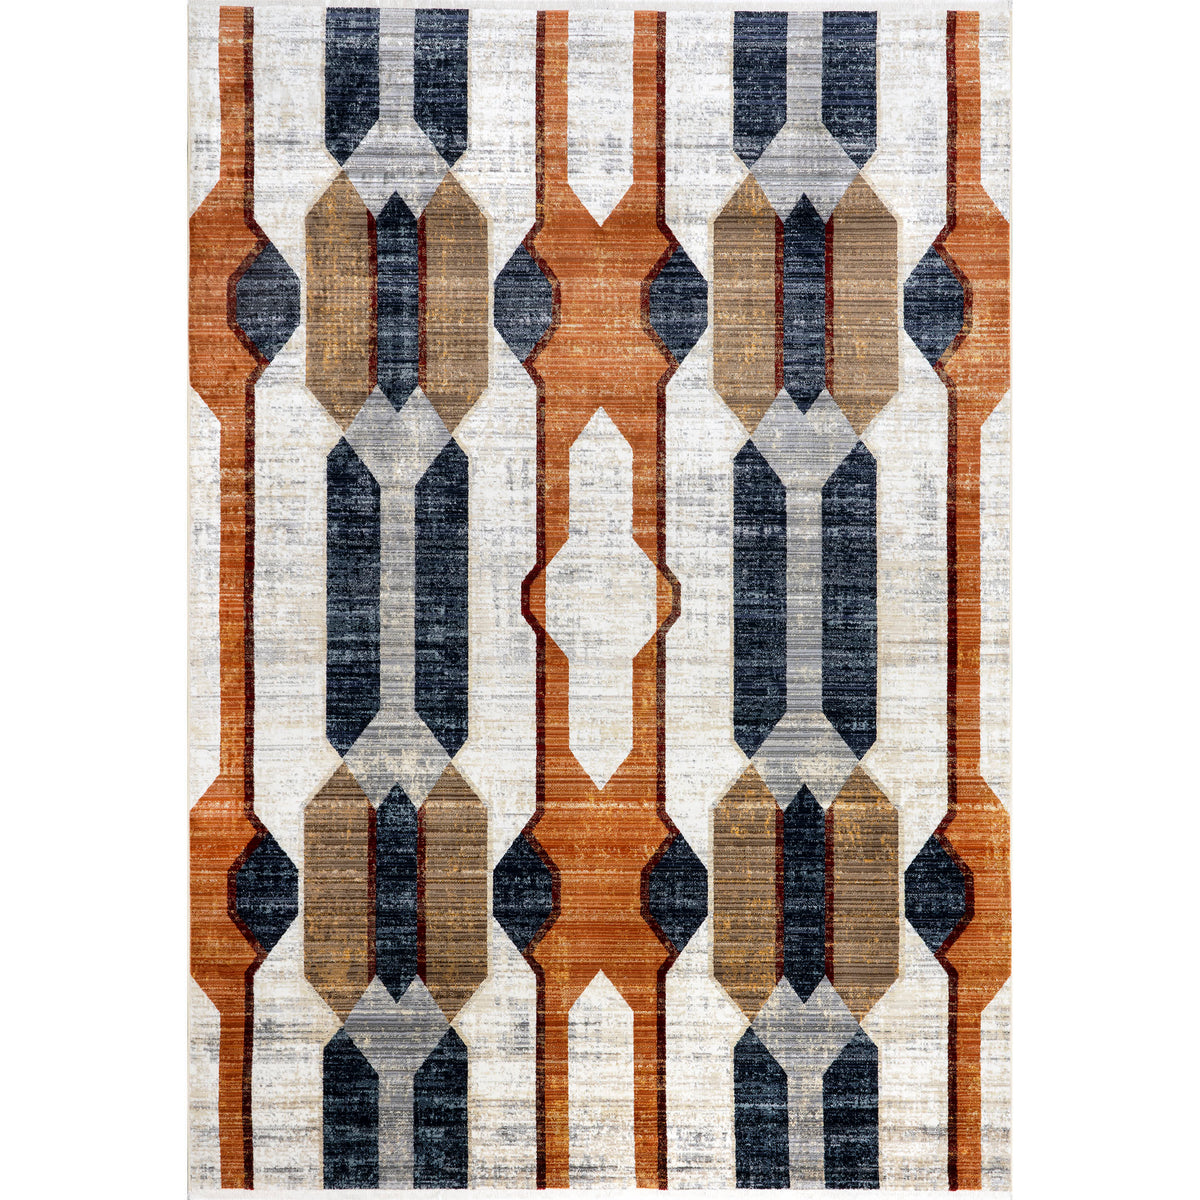 Chic Area Rug - Mudcloth Design - 6 x 9-ft - The Collab USA